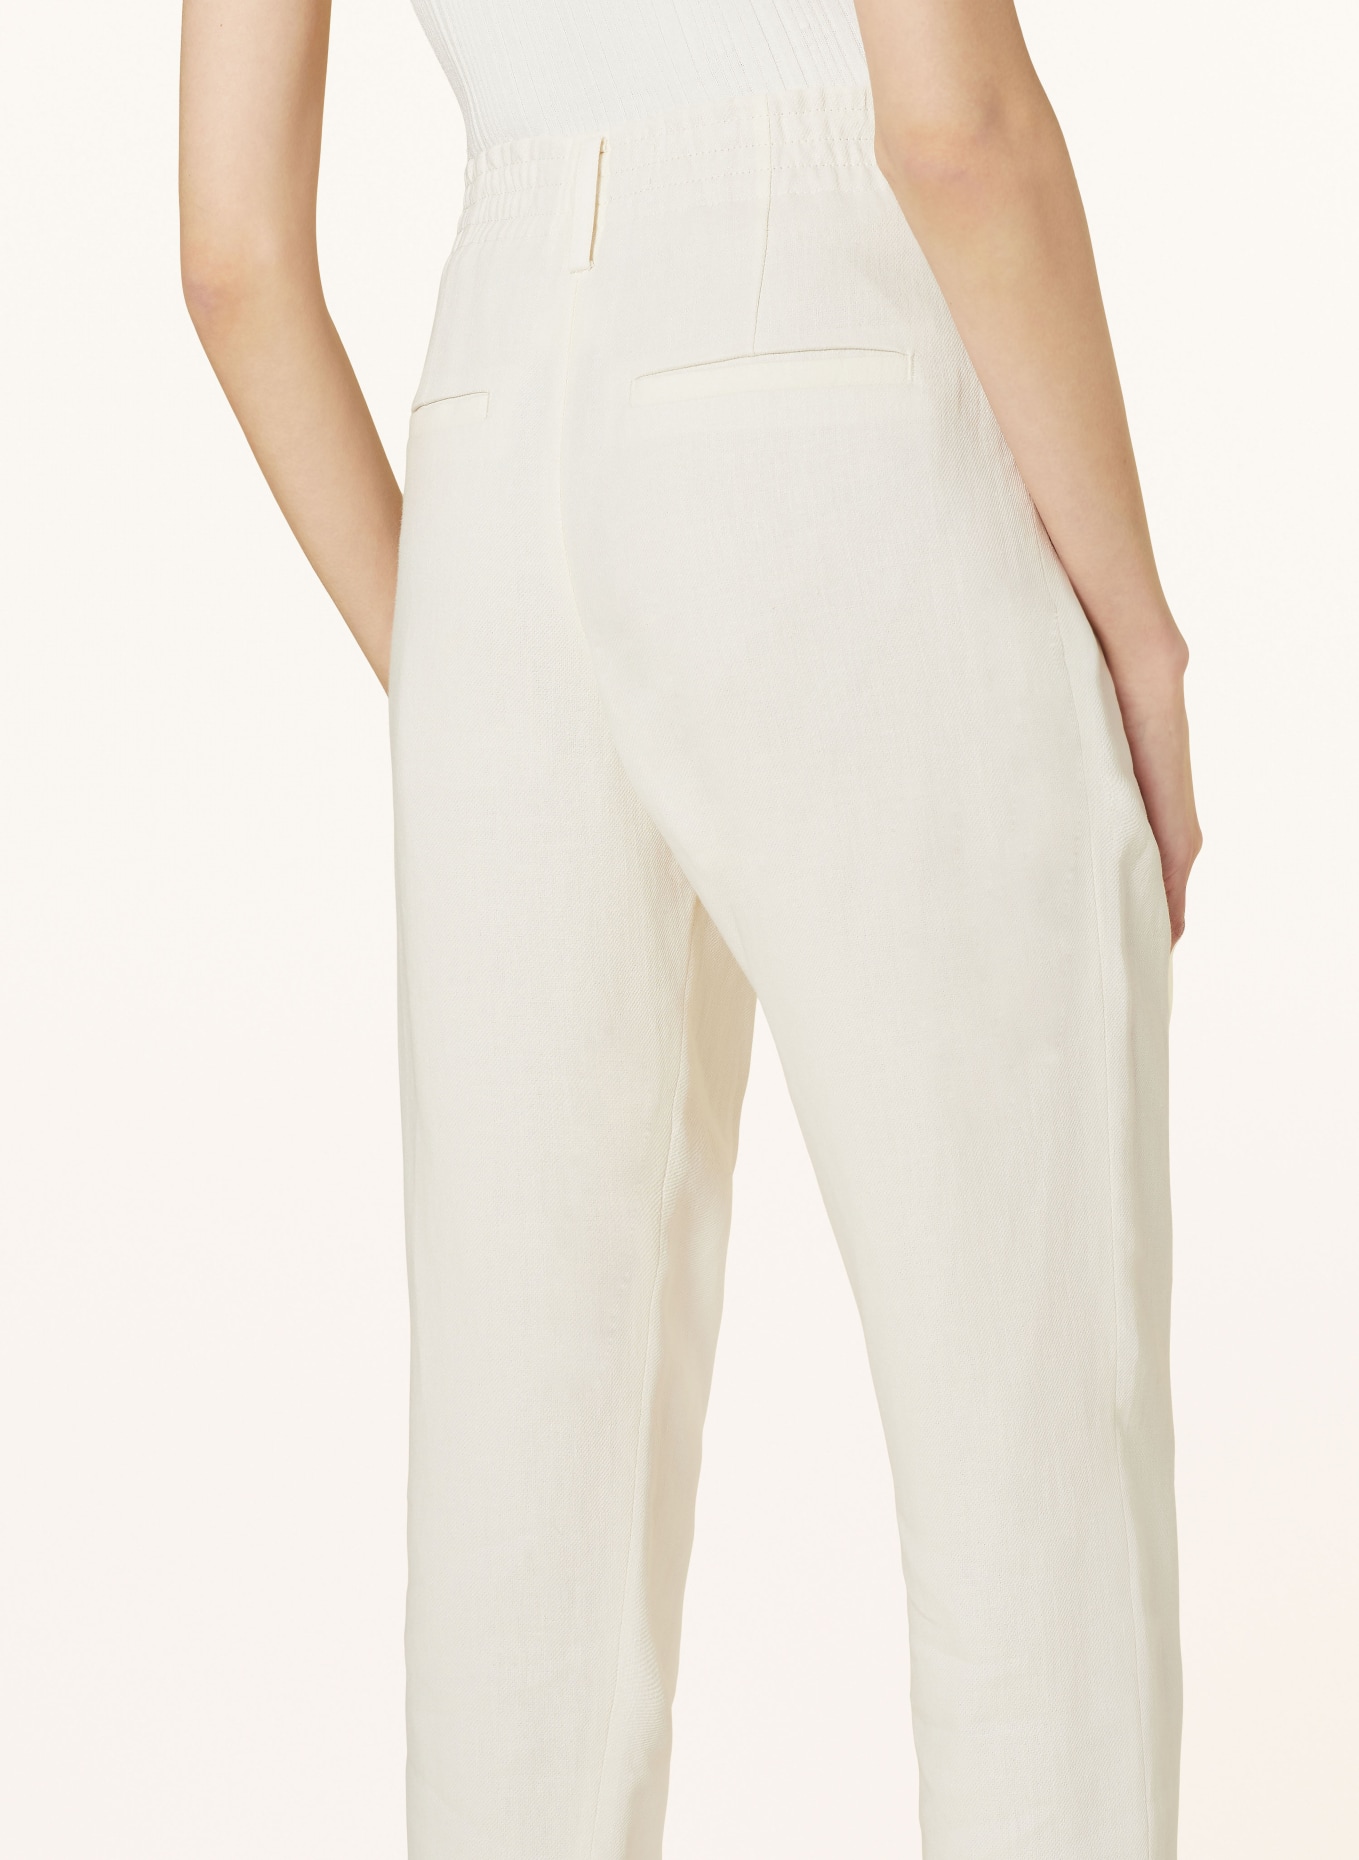 DRYKORN 7/8 trousers DISPATCH with linen, Color: ECRU (Image 6)